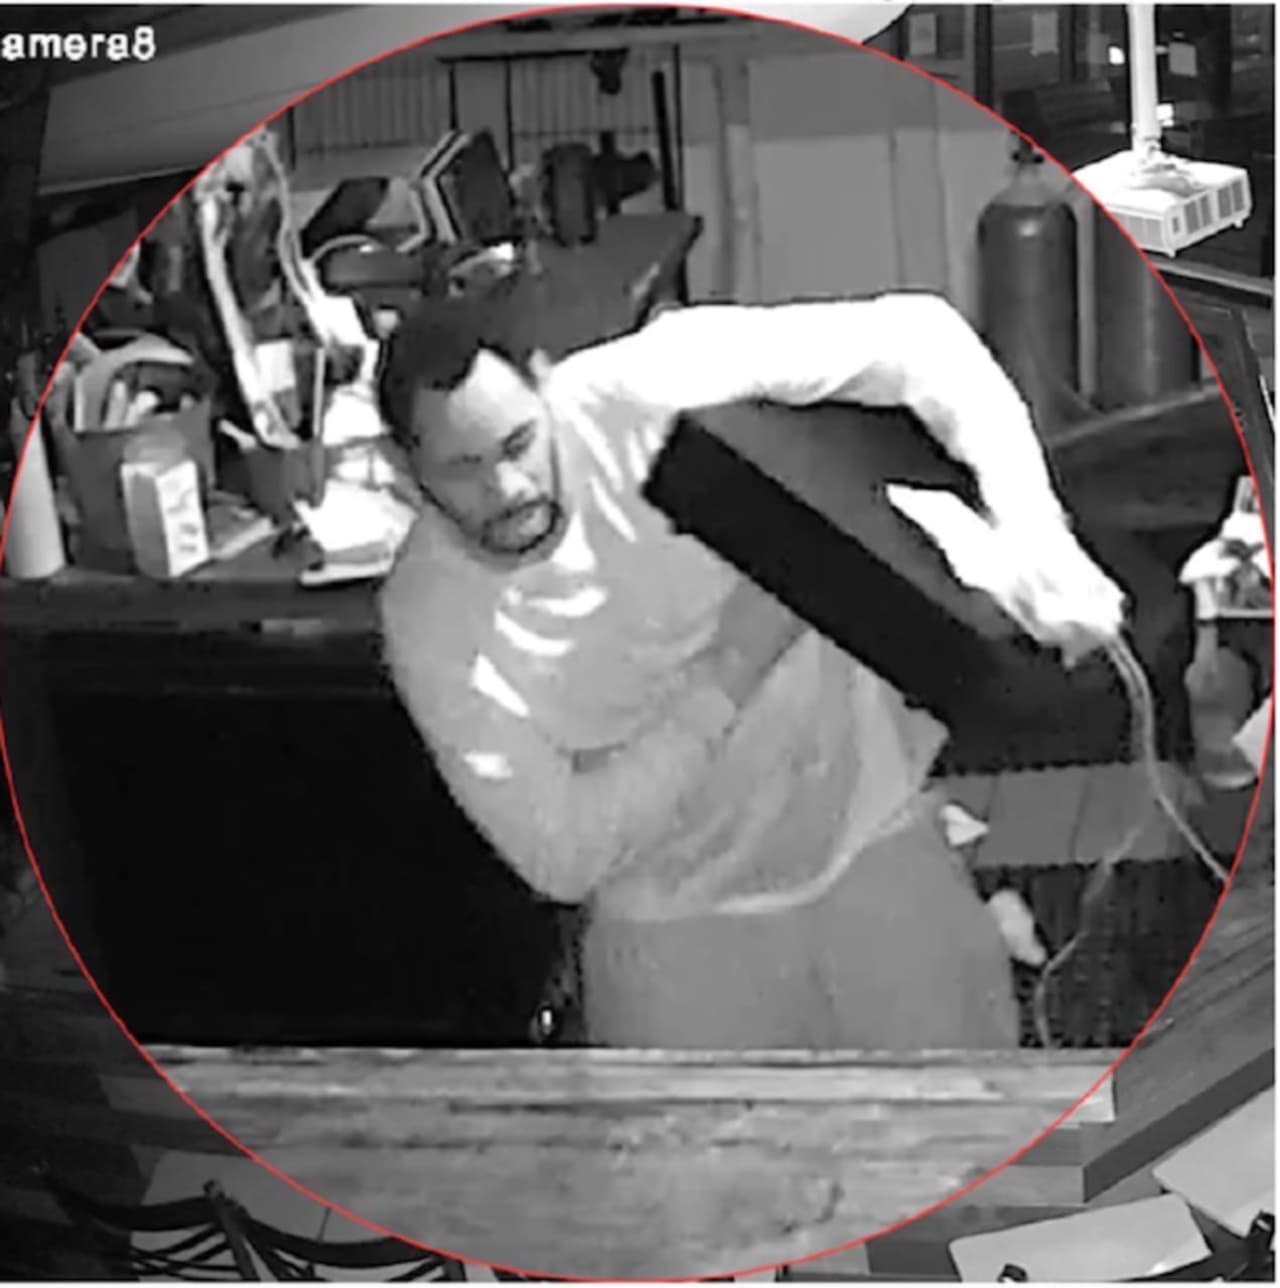 A suspect who stole a cash drawer from a restaurant in Bridgeport is at large and police are asking the public for help in identifying and finding him.